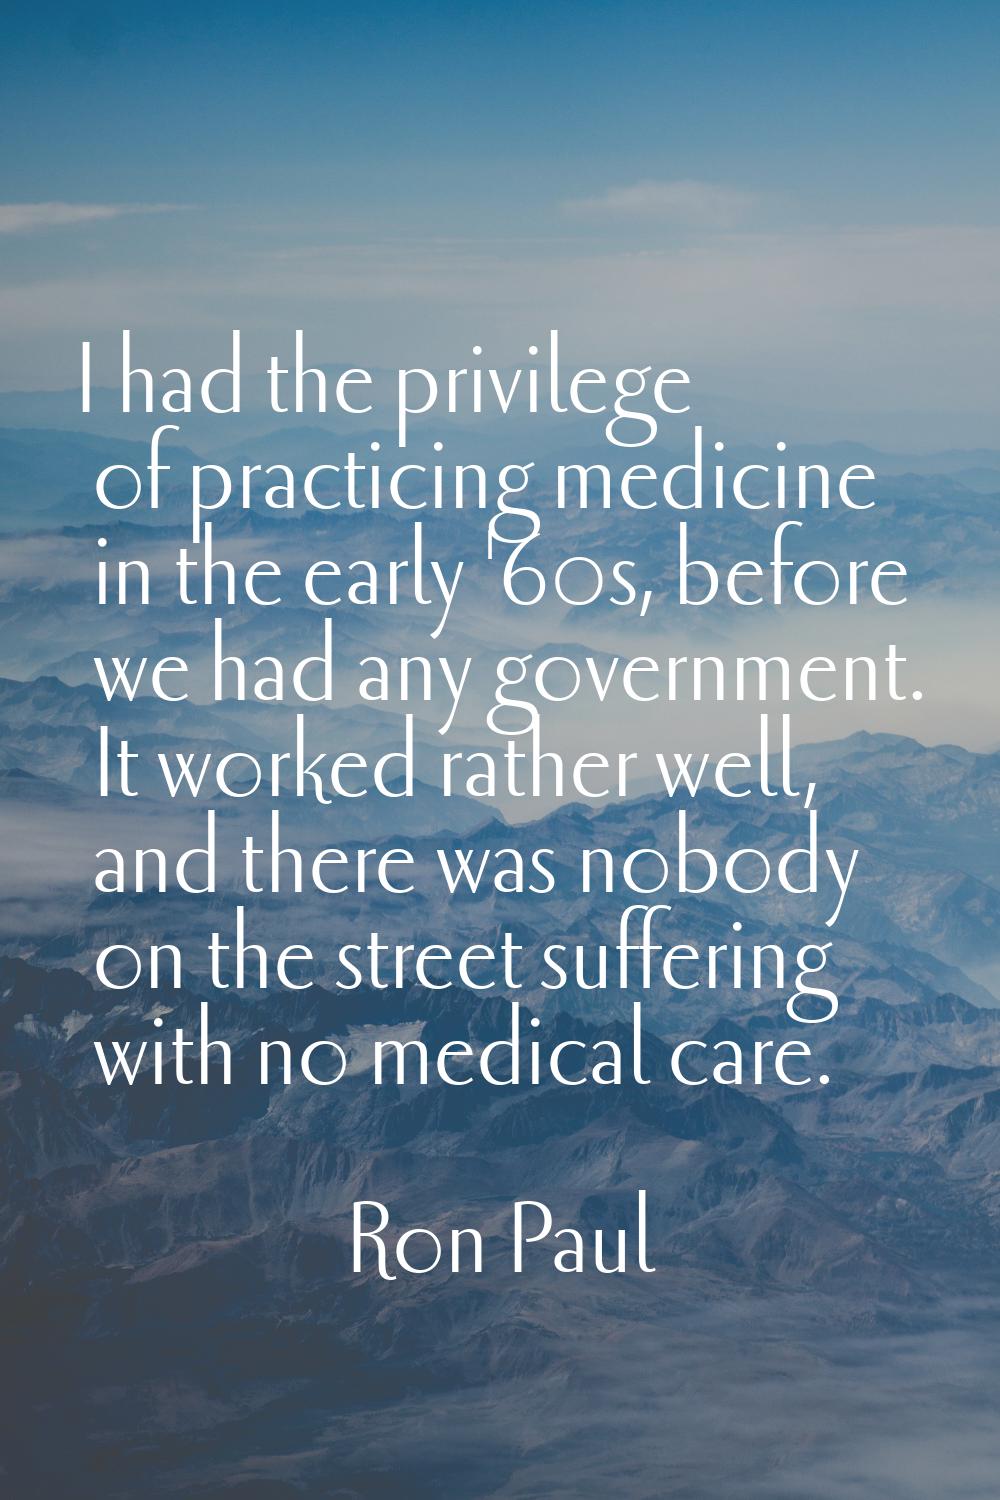 I had the privilege of practicing medicine in the early '60s, before we had any government. It work